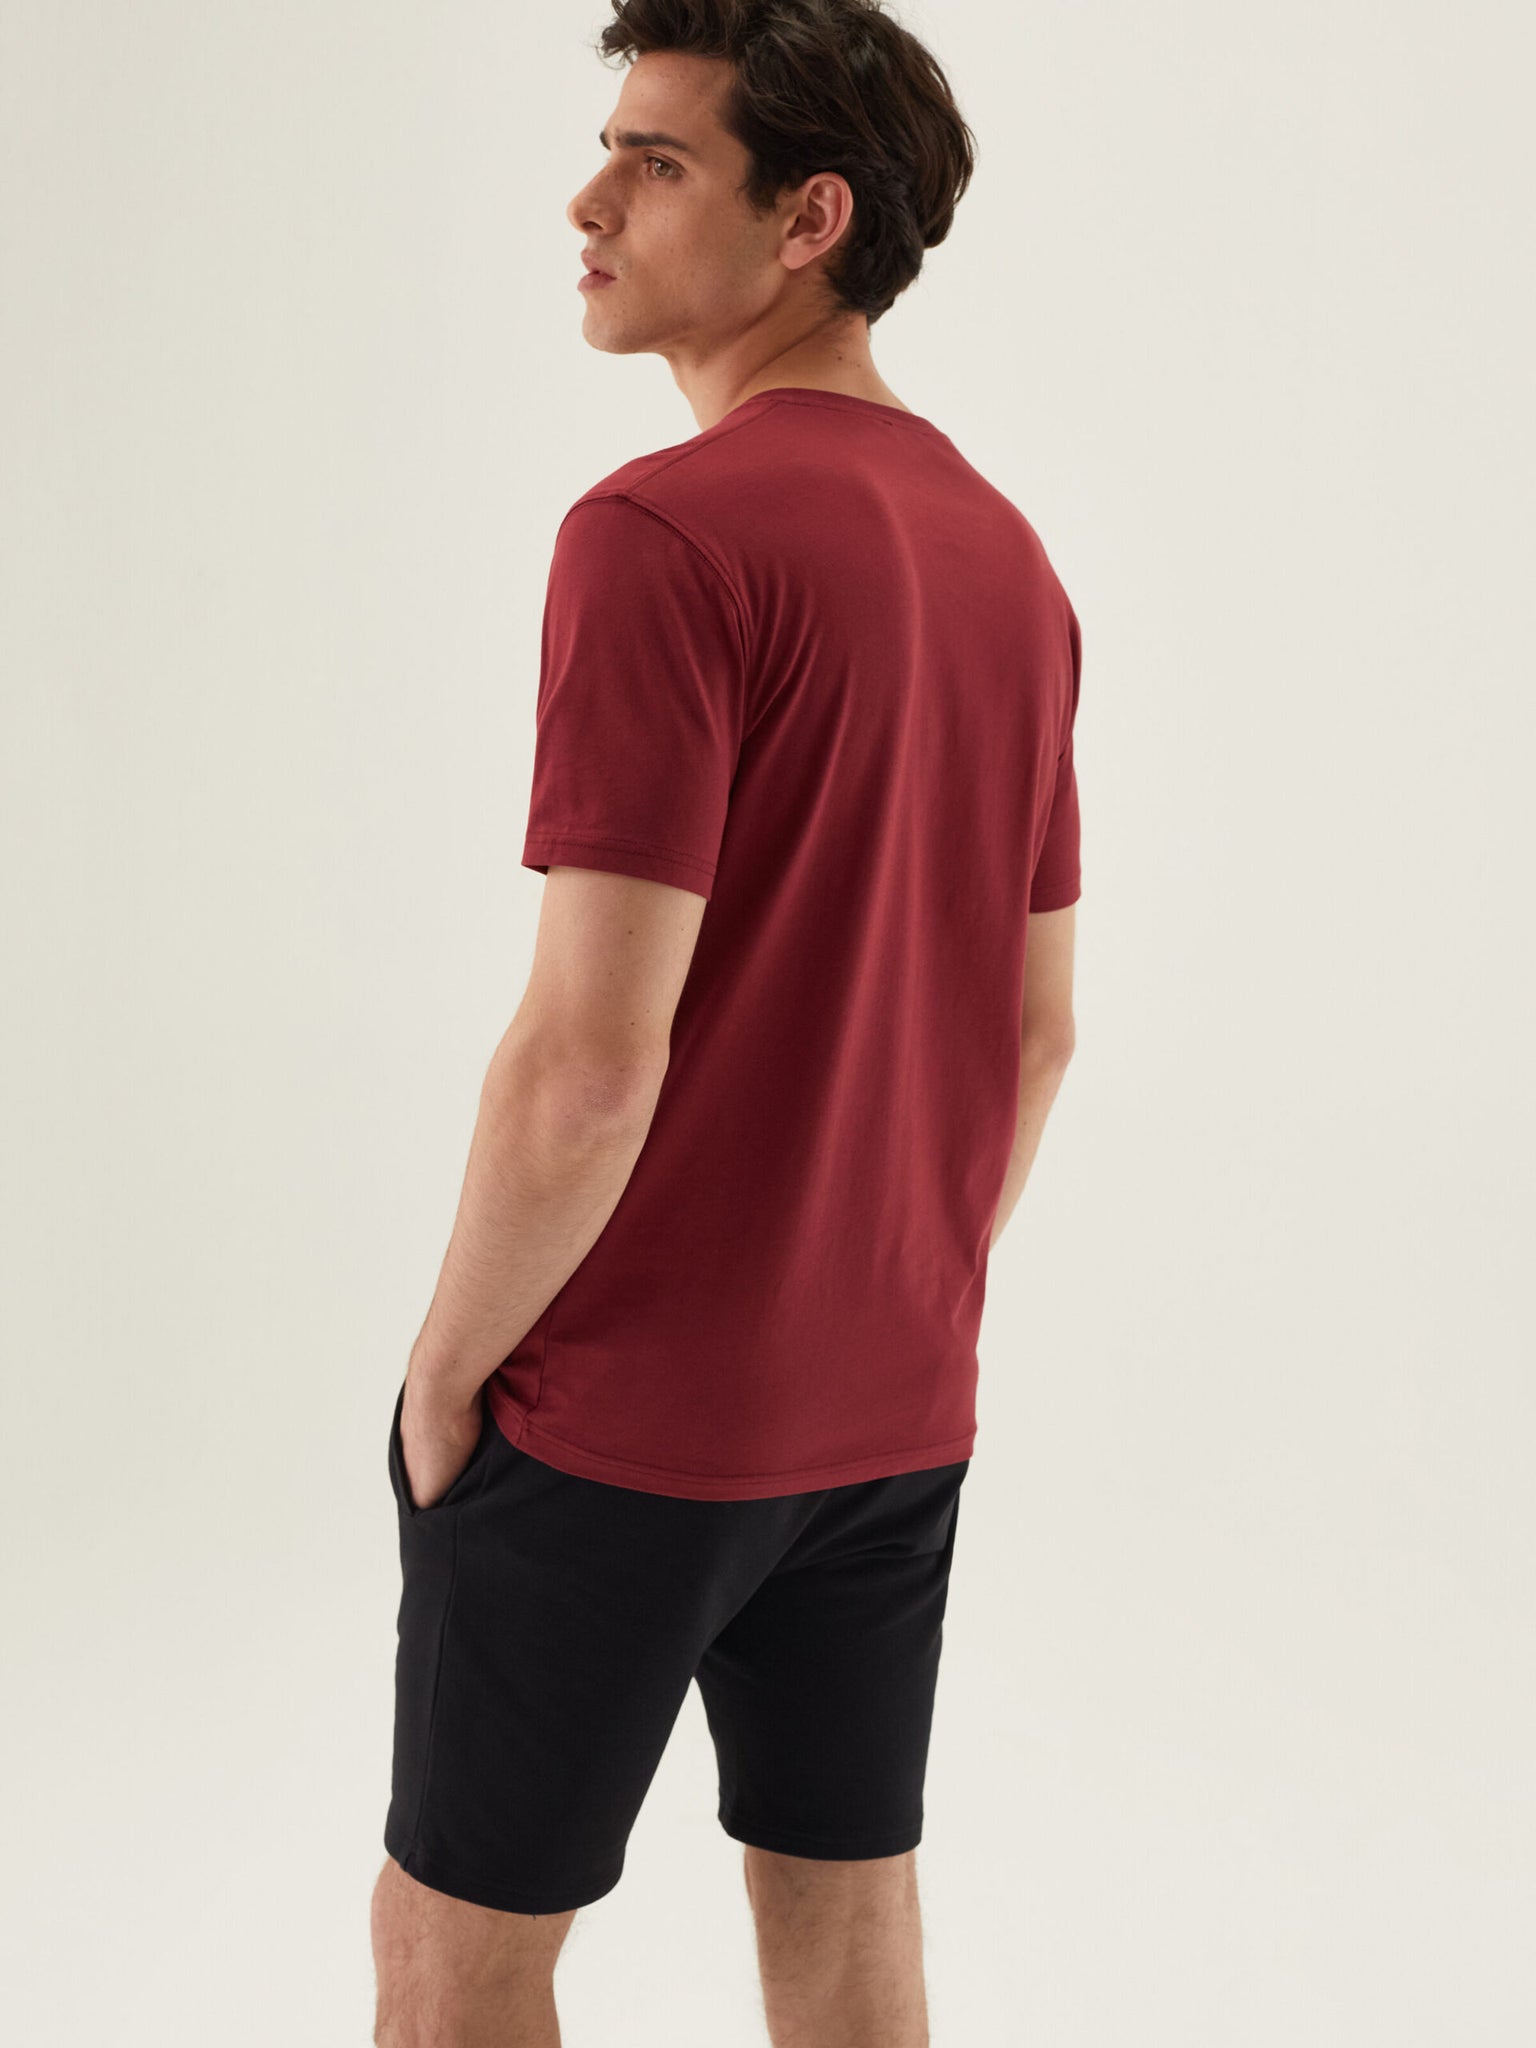 Recycled Cotton V-Neck Tee